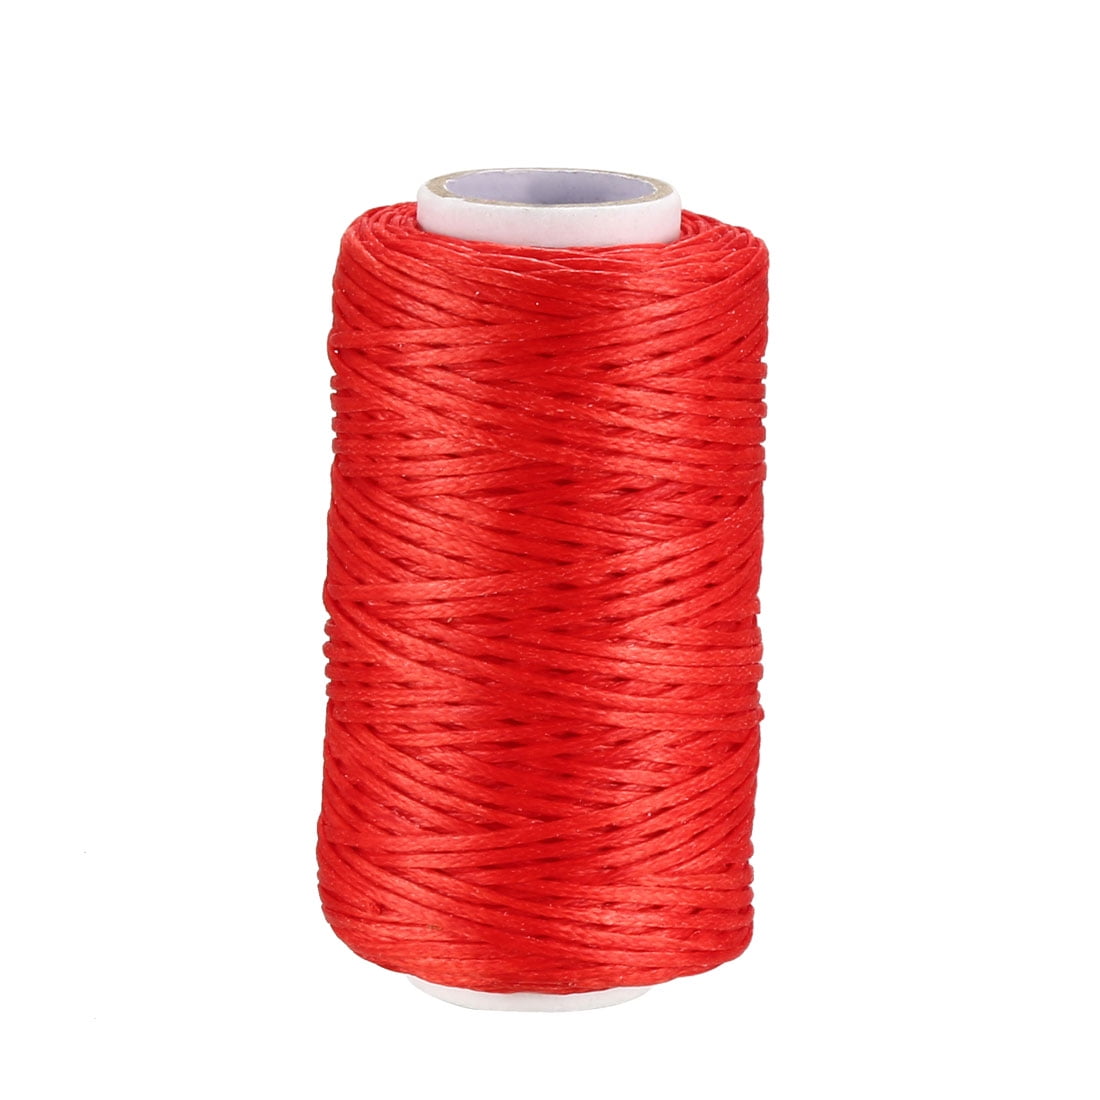 1pc 50m Waxed Thread Cord 150d Polyester Stitching Thread Handicraft Sewing Tool 